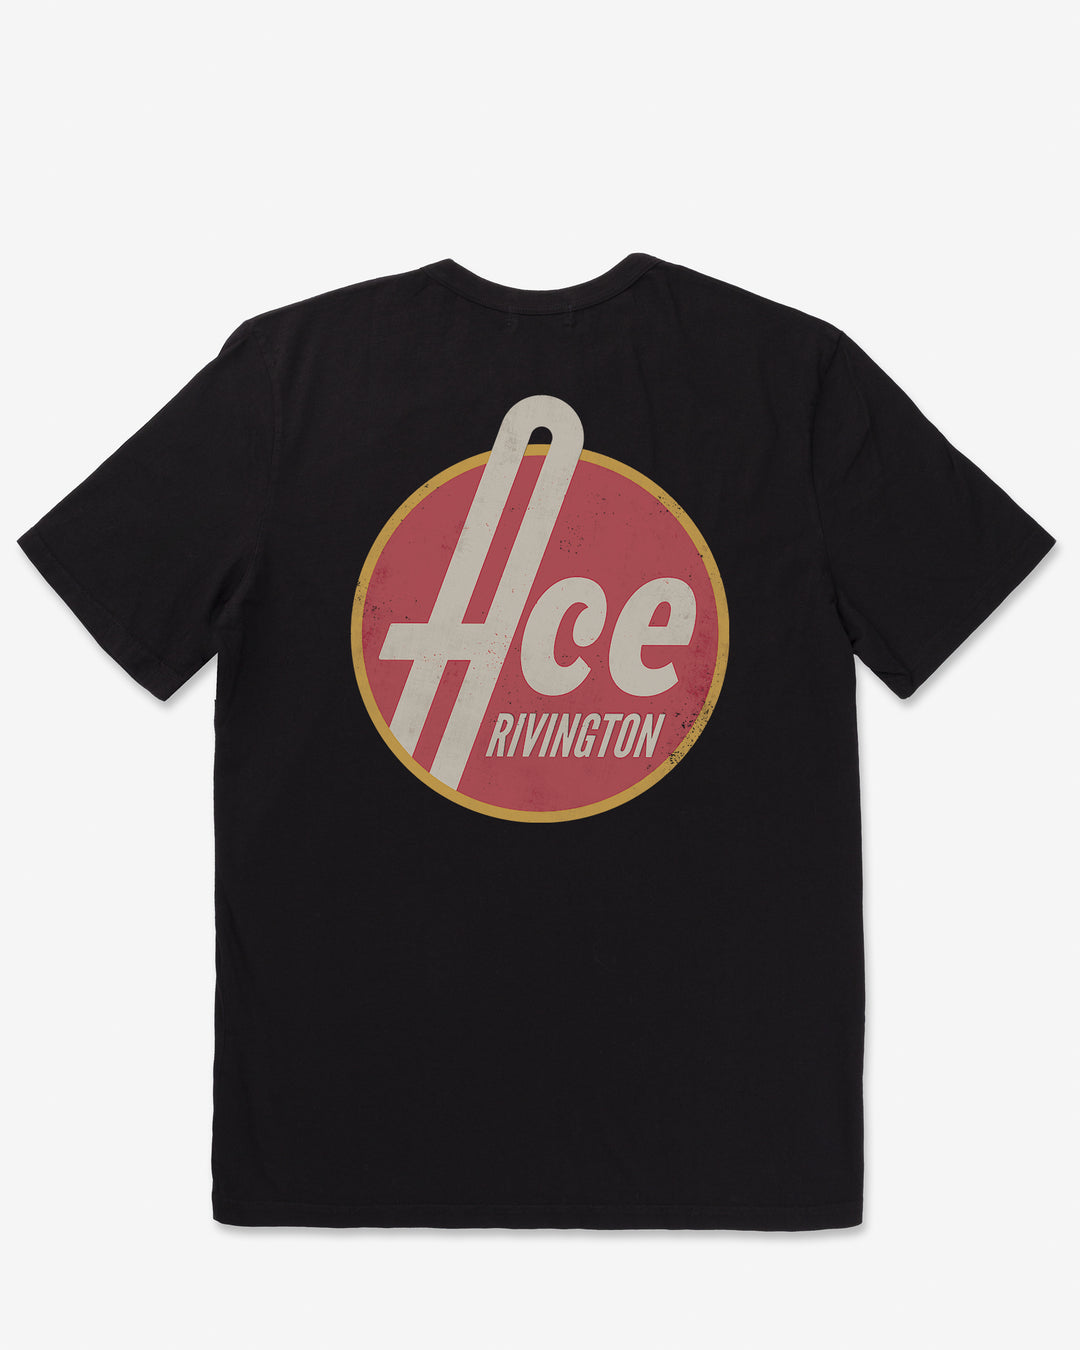 back of men's black graphic tee shirt parodying 1950's style aesthetic reading "Ace Rivington" in bold off-white text encircled by a red fill and gold rim